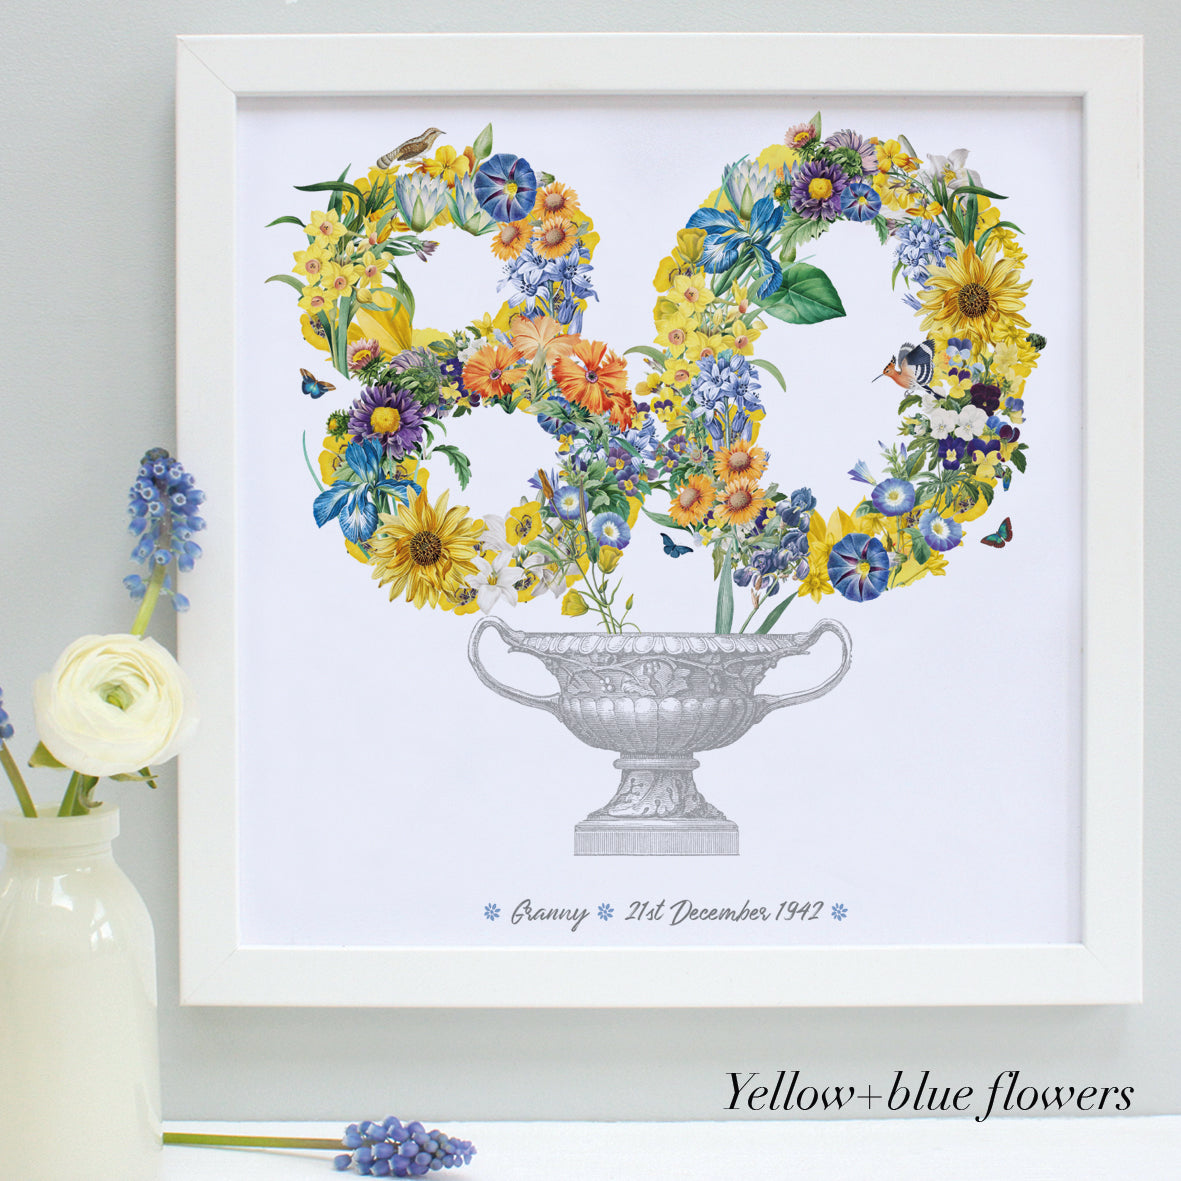 80th birthday number in yellow and blue flowers in a white frame